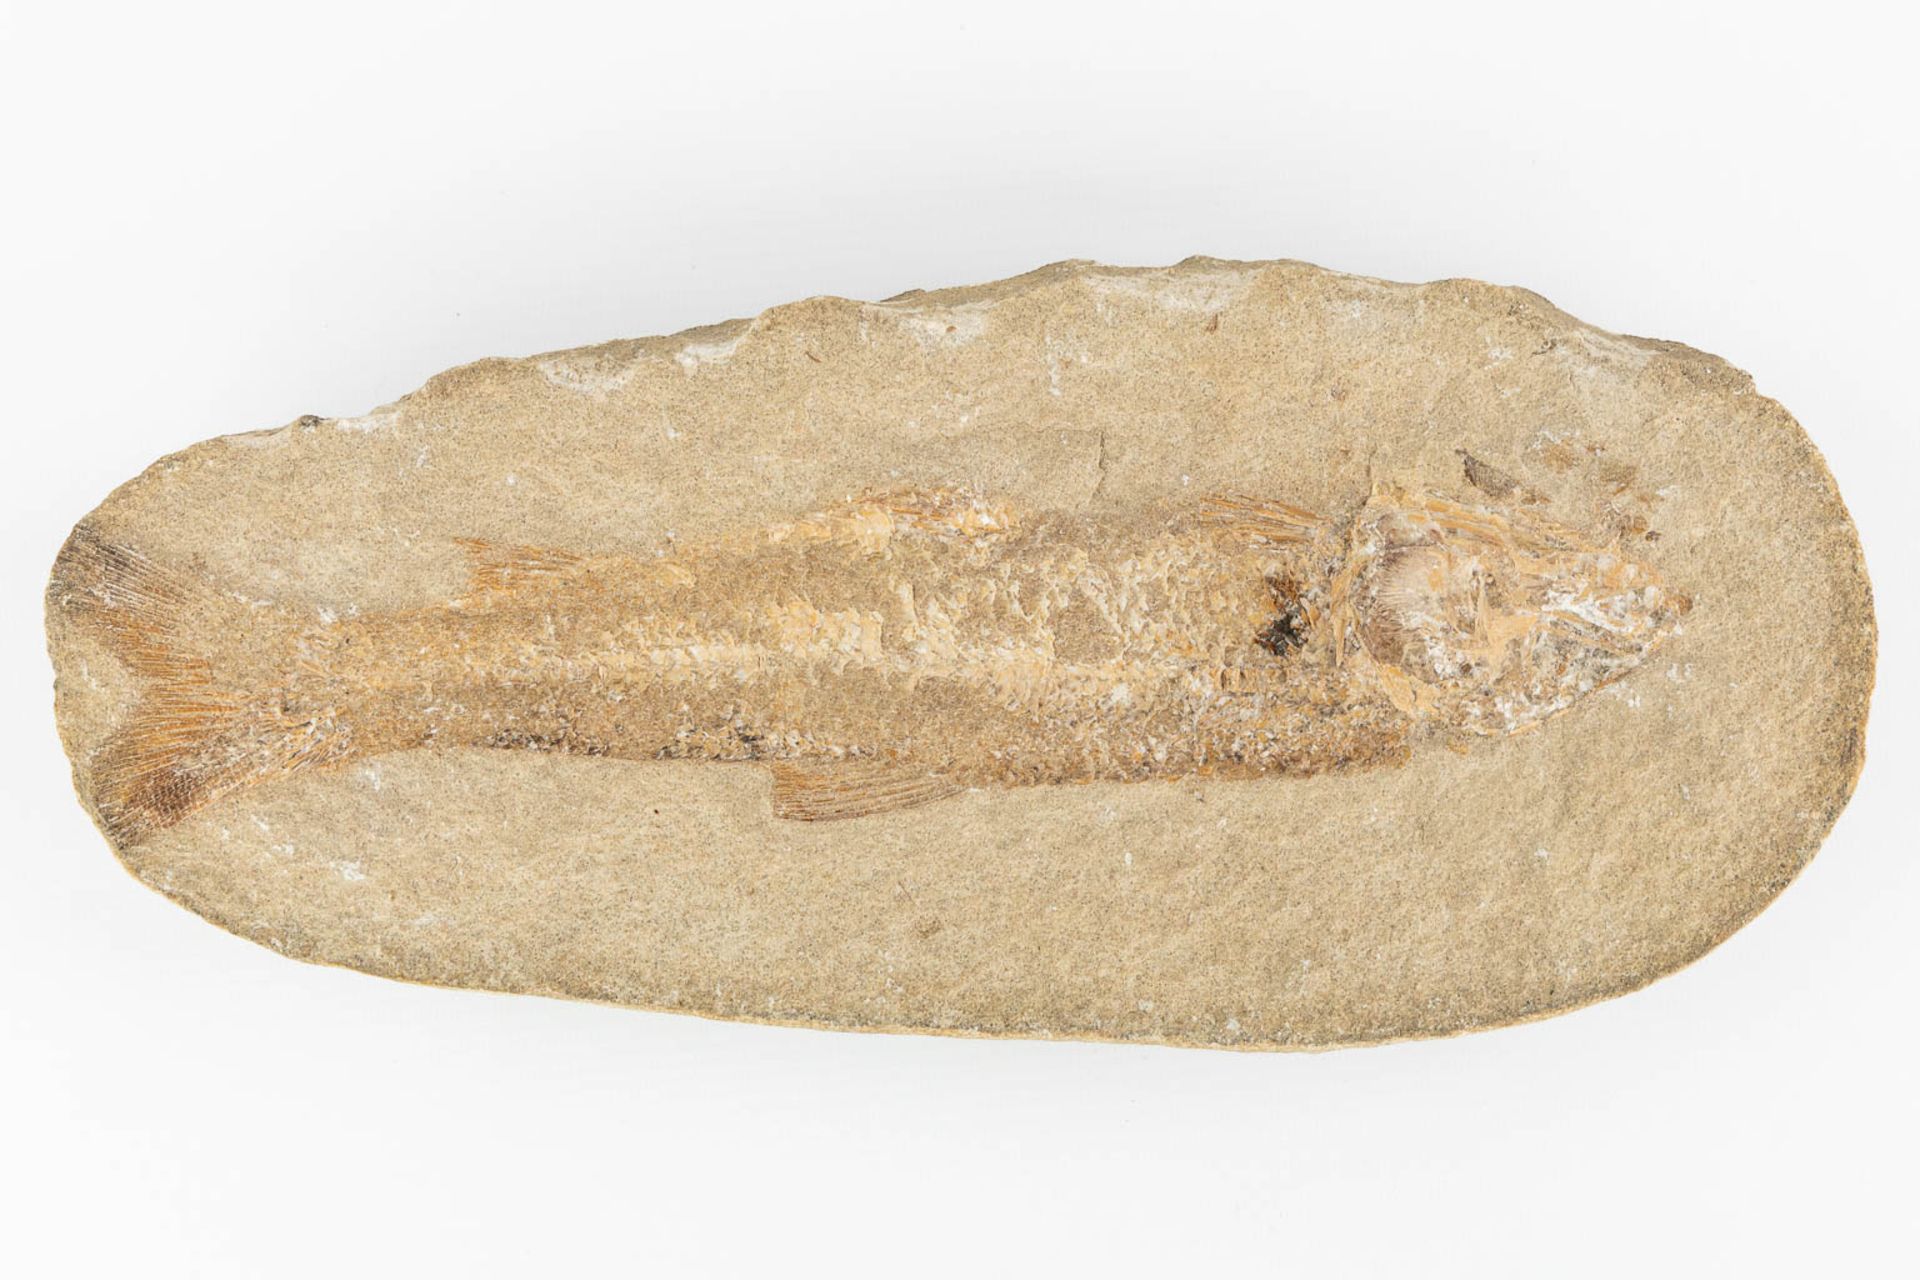 A fossil of a fish in a stone, with both pieces. (L:8 x W:32 x H:15 cm) - Bild 7 aus 11